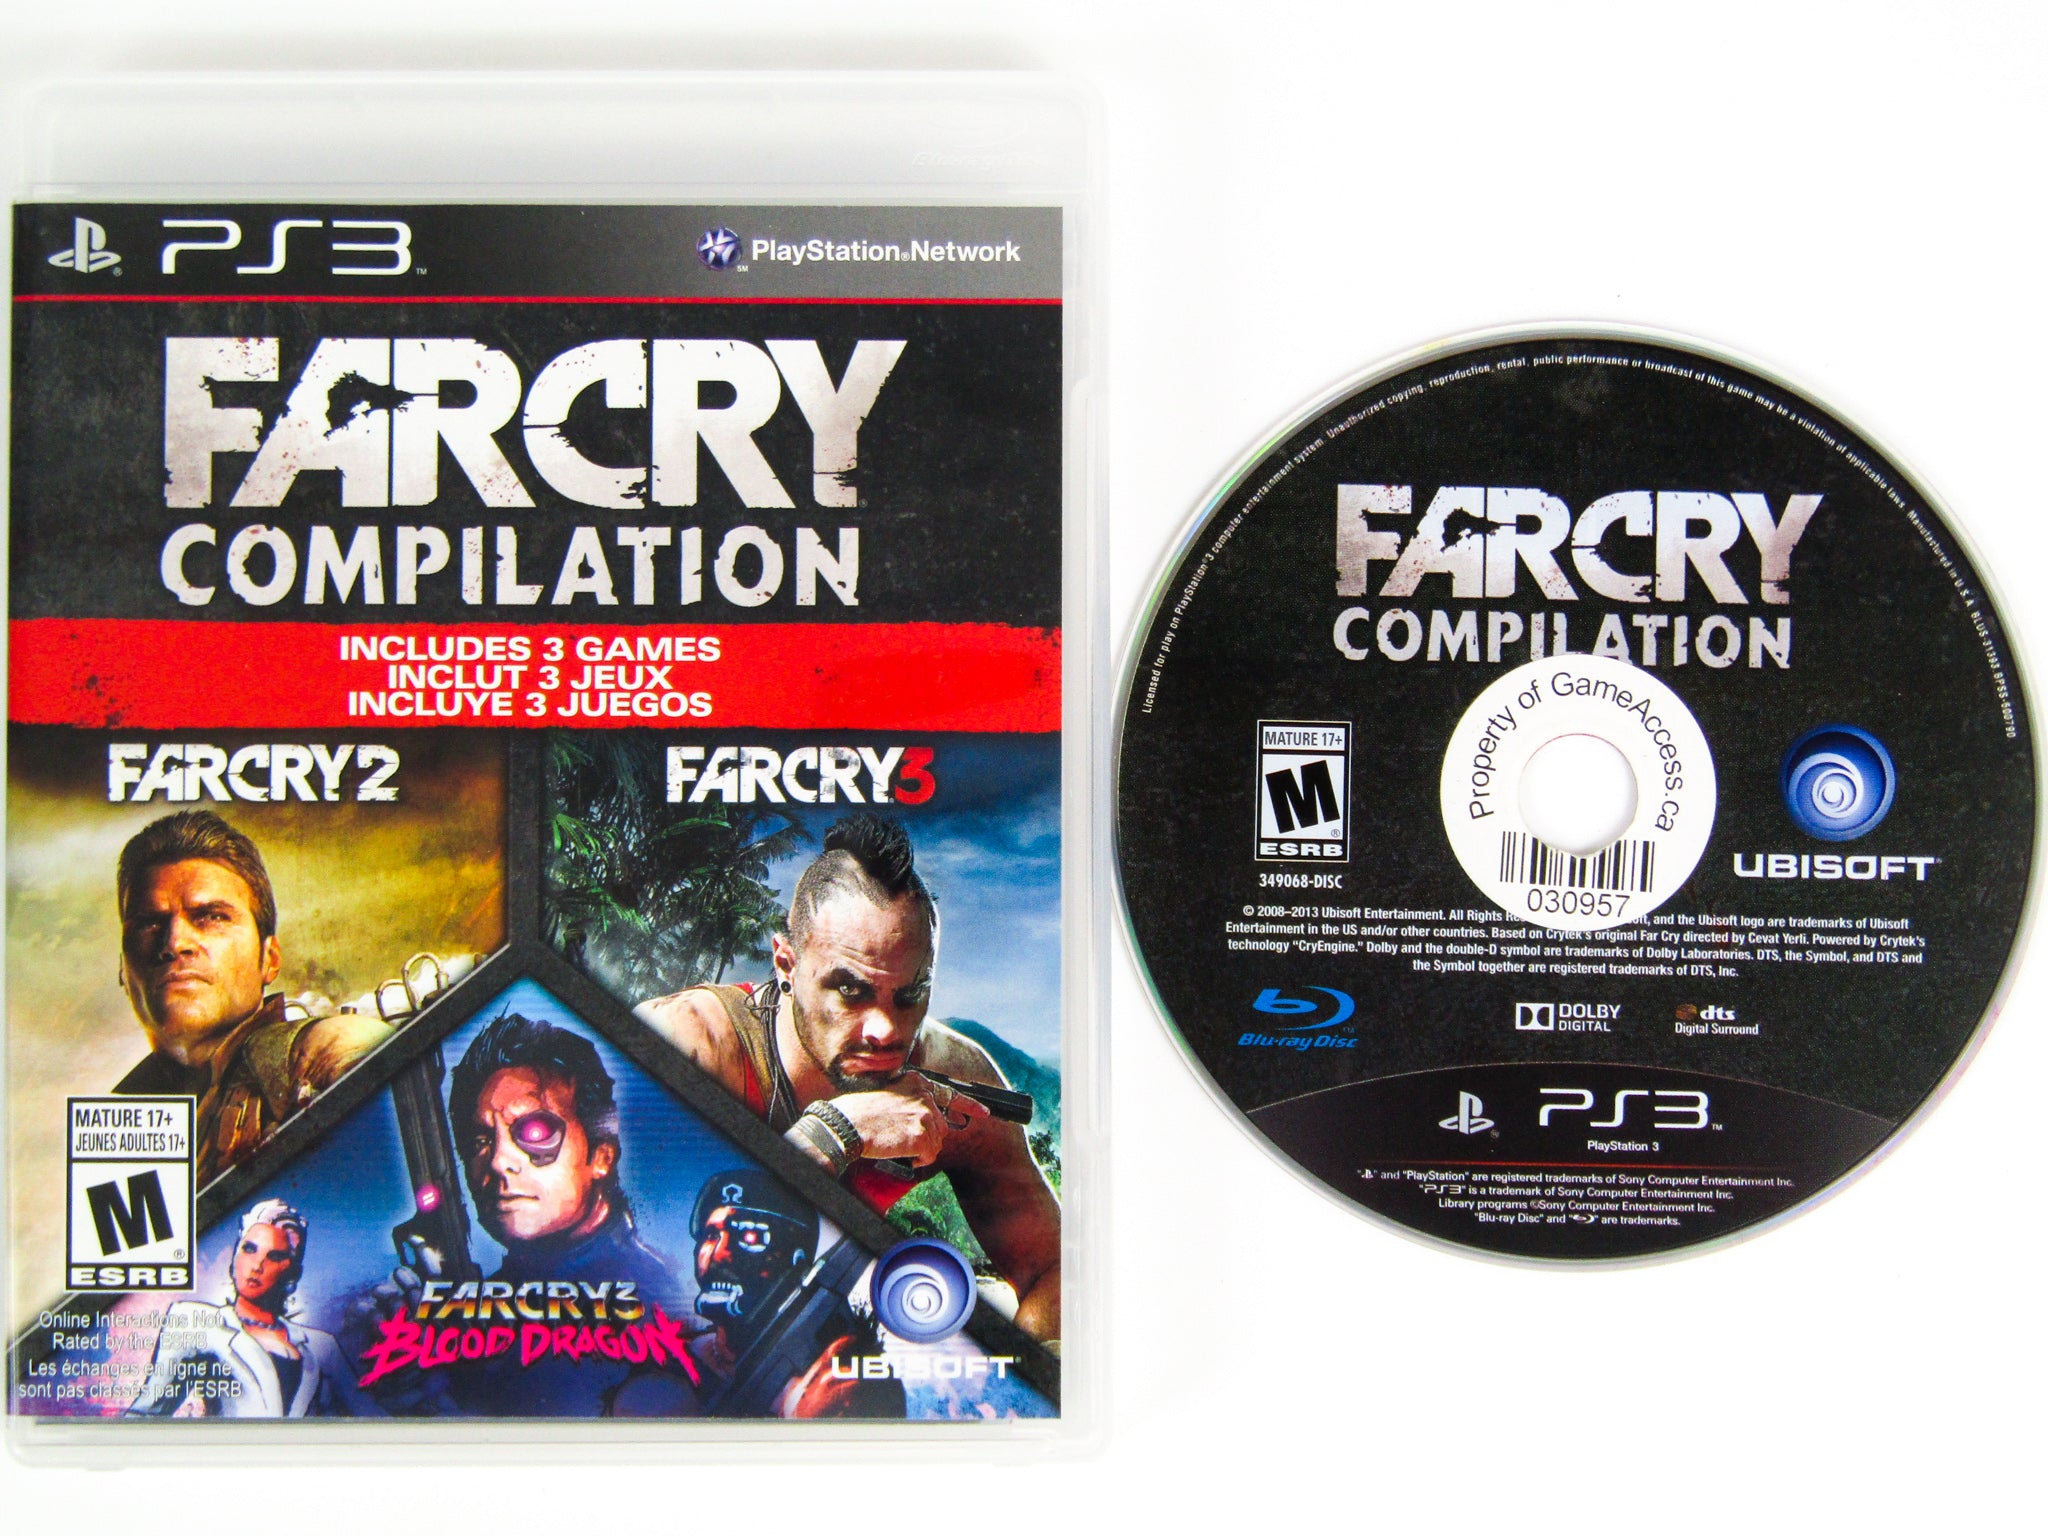 FAR CRY 3 PlayStation 3 w/ Manual Ubisoft Greatest Hits Action FARCRY PS3  8888346319